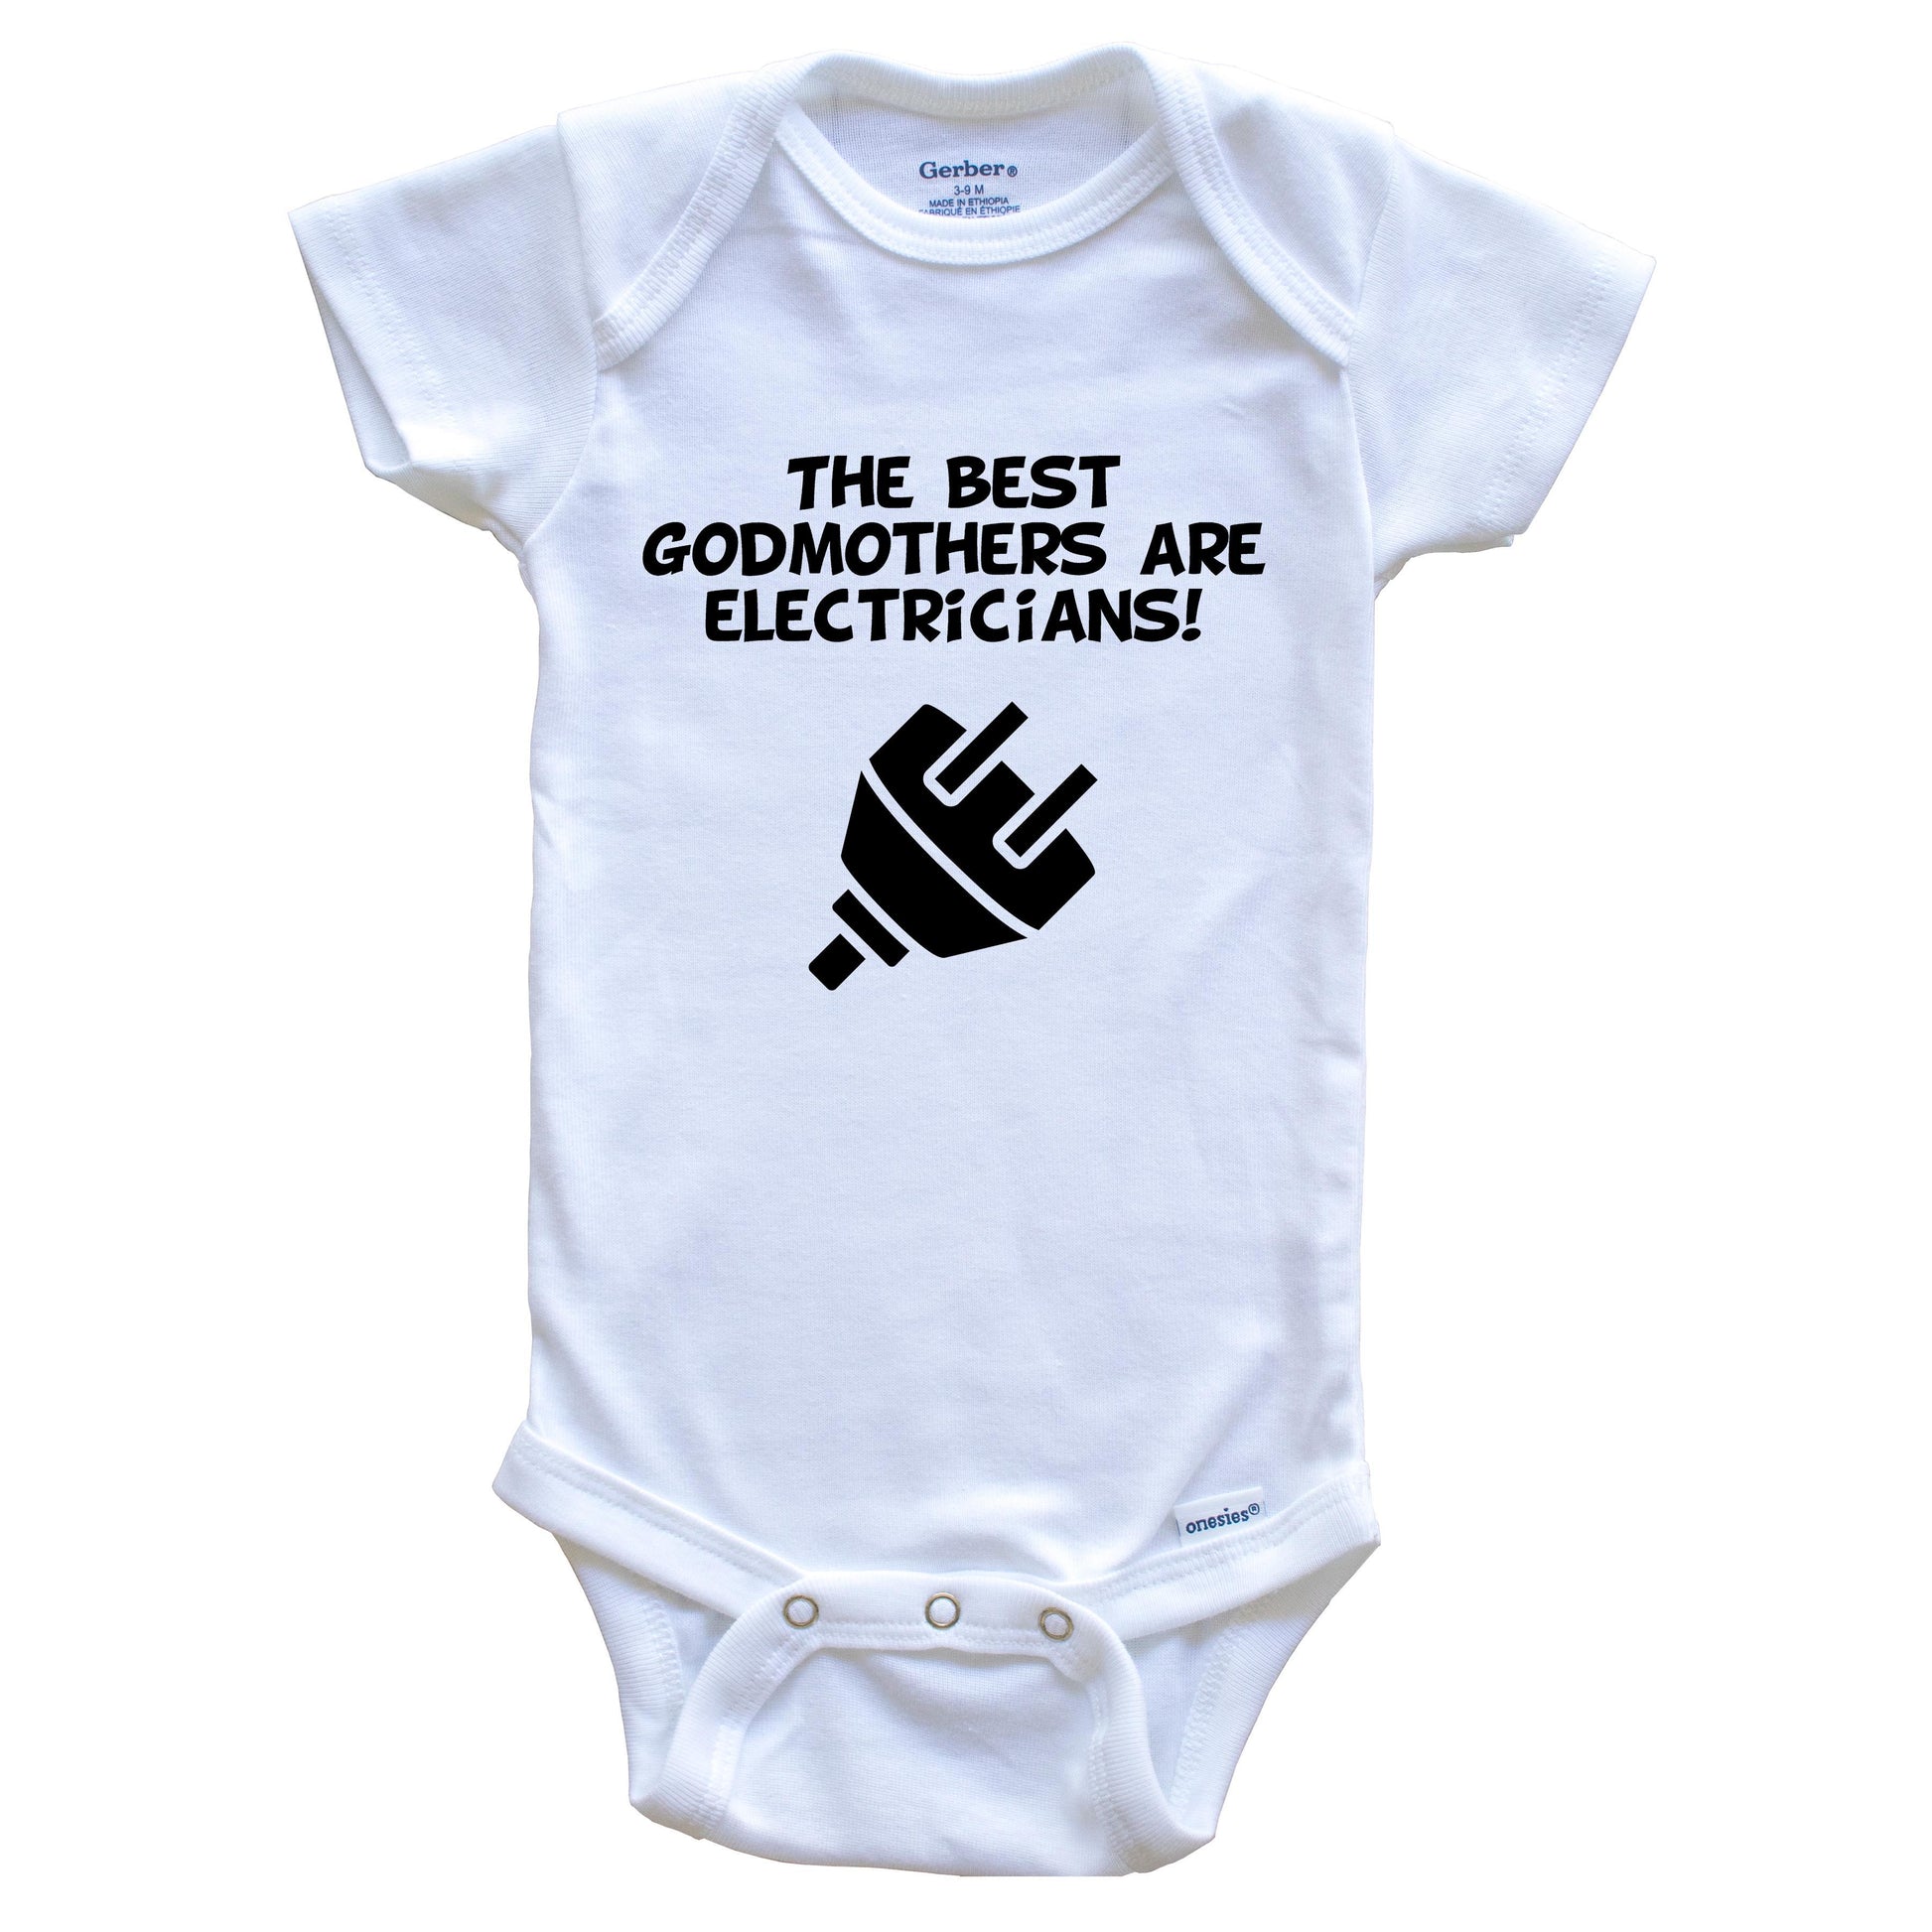 The Best Godmothers Are Electricians Funny Godchild Baby Onesie